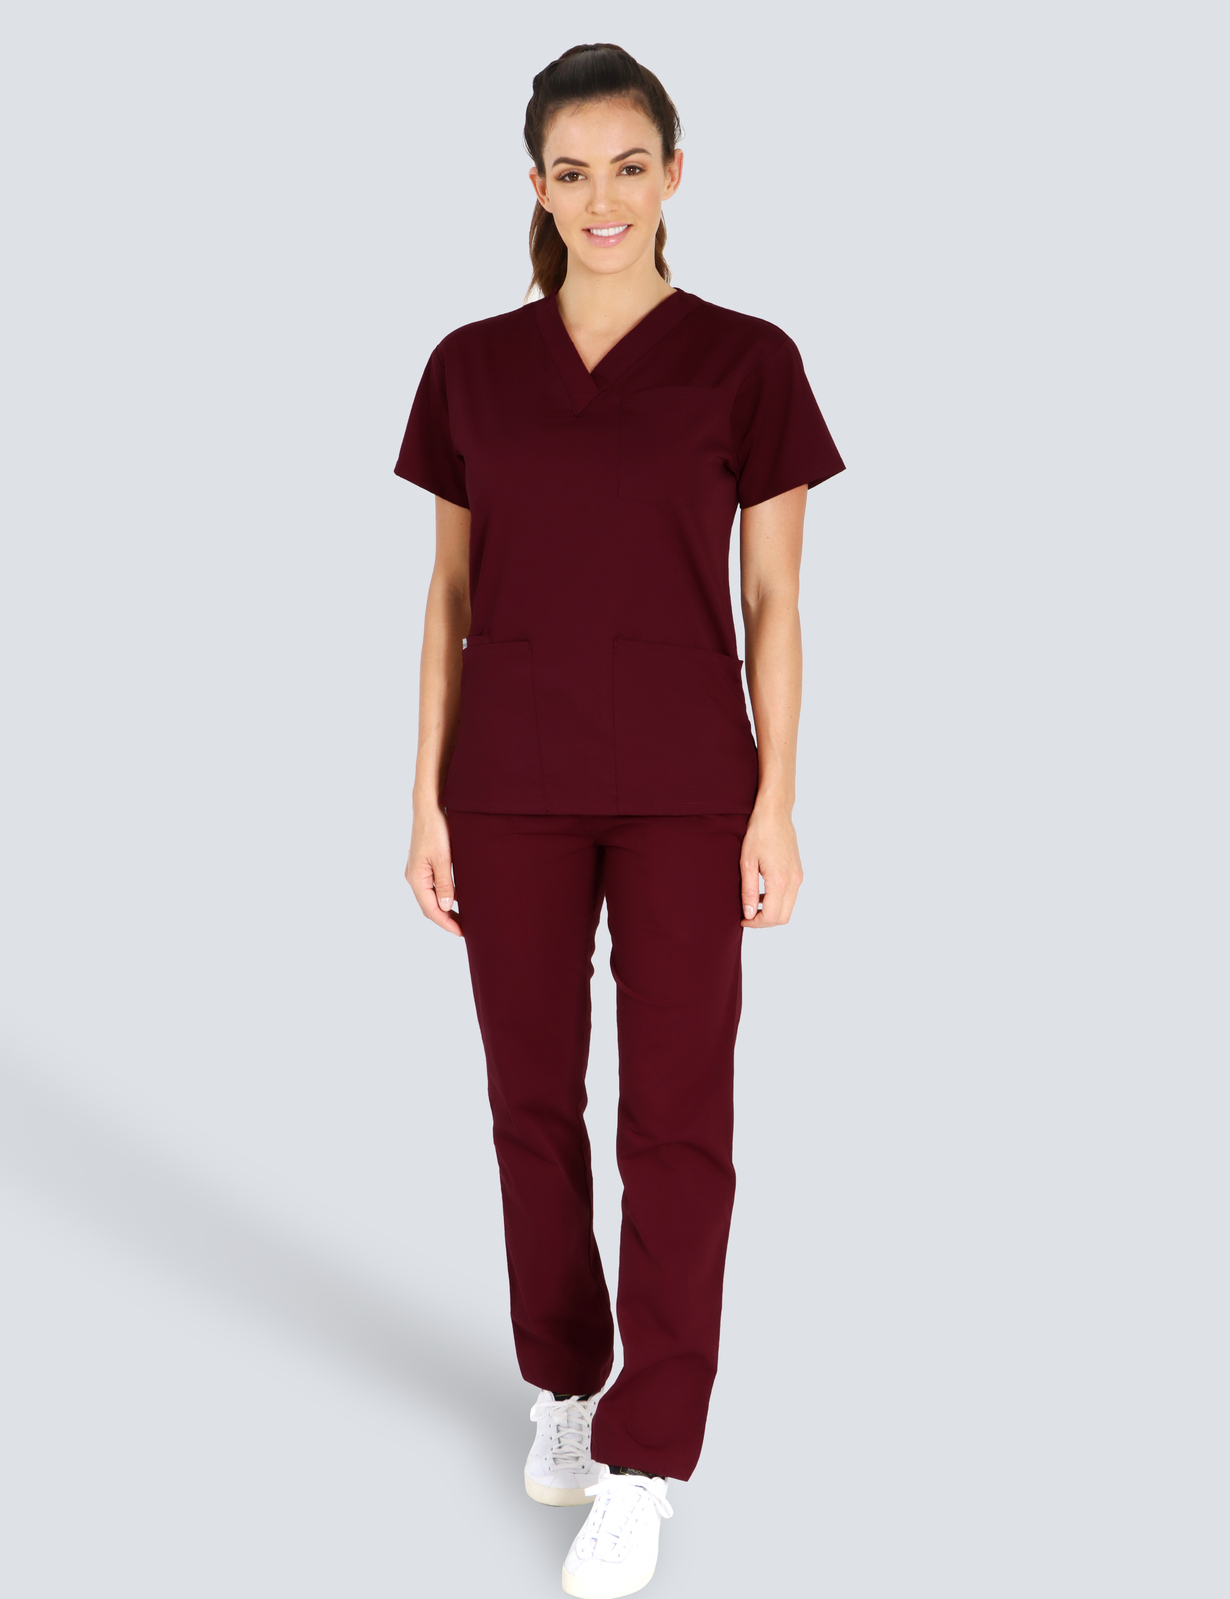 The Alfred Hospital - Pathology (4 Pocket Scrub Top and Cargo Pants in Aubergine incl Logos)